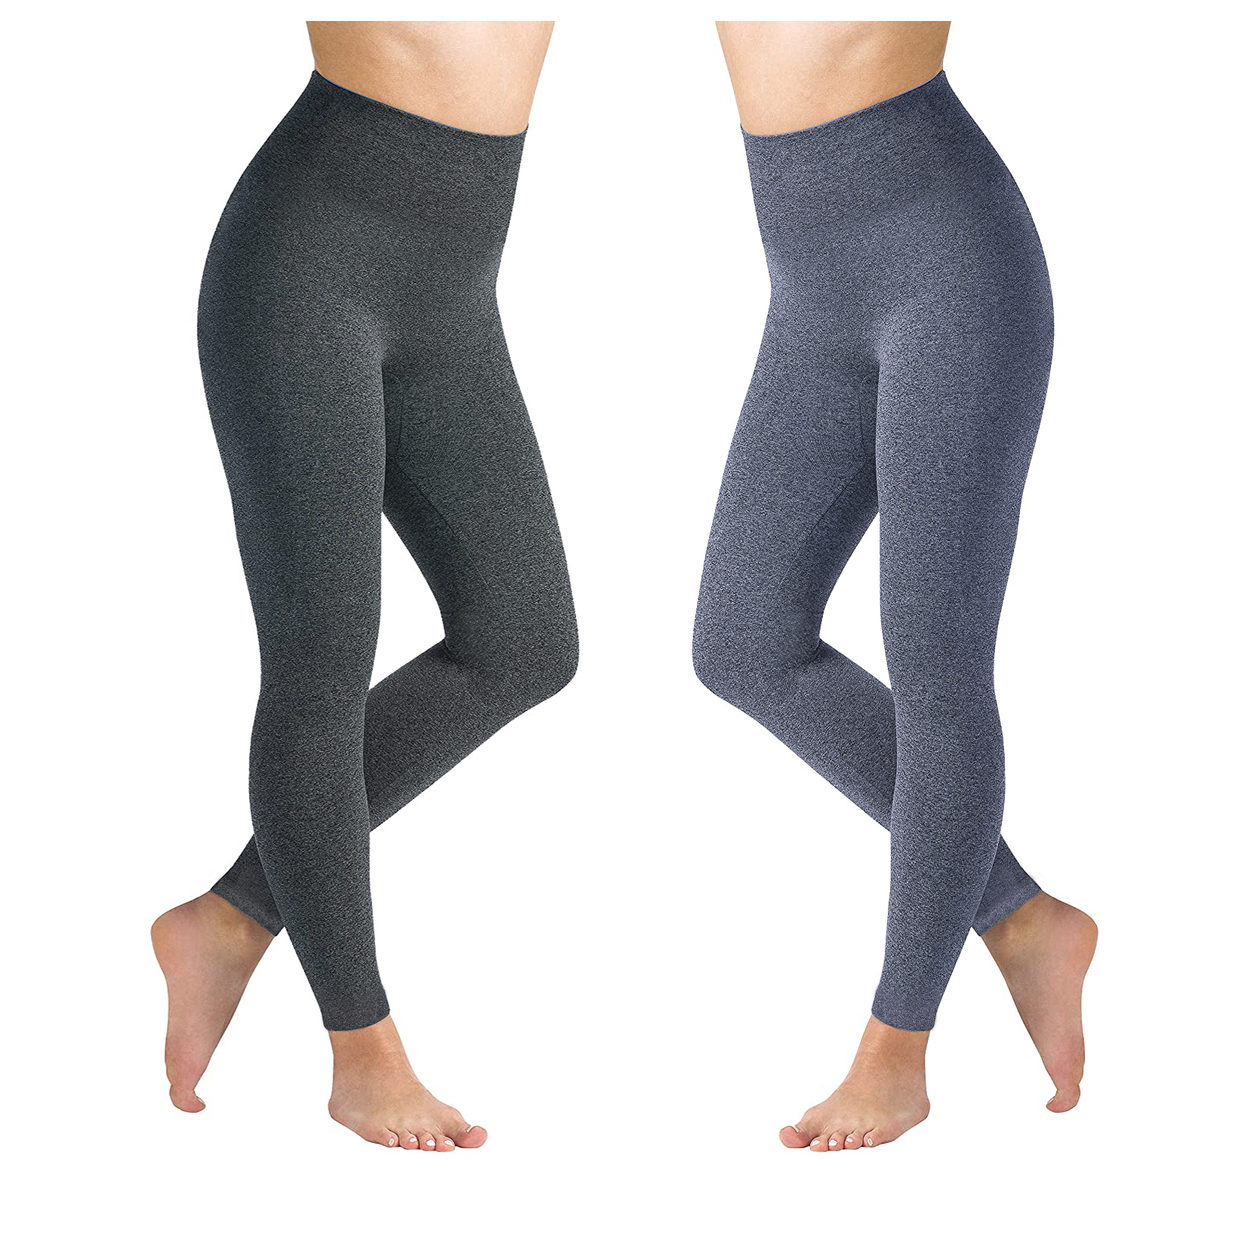 2-Pack: Women's High Waisted Ultra Soft Fleece Lined Warm Marled Leggings(Available In Plus Sizes) - Navy & Navy, 1x